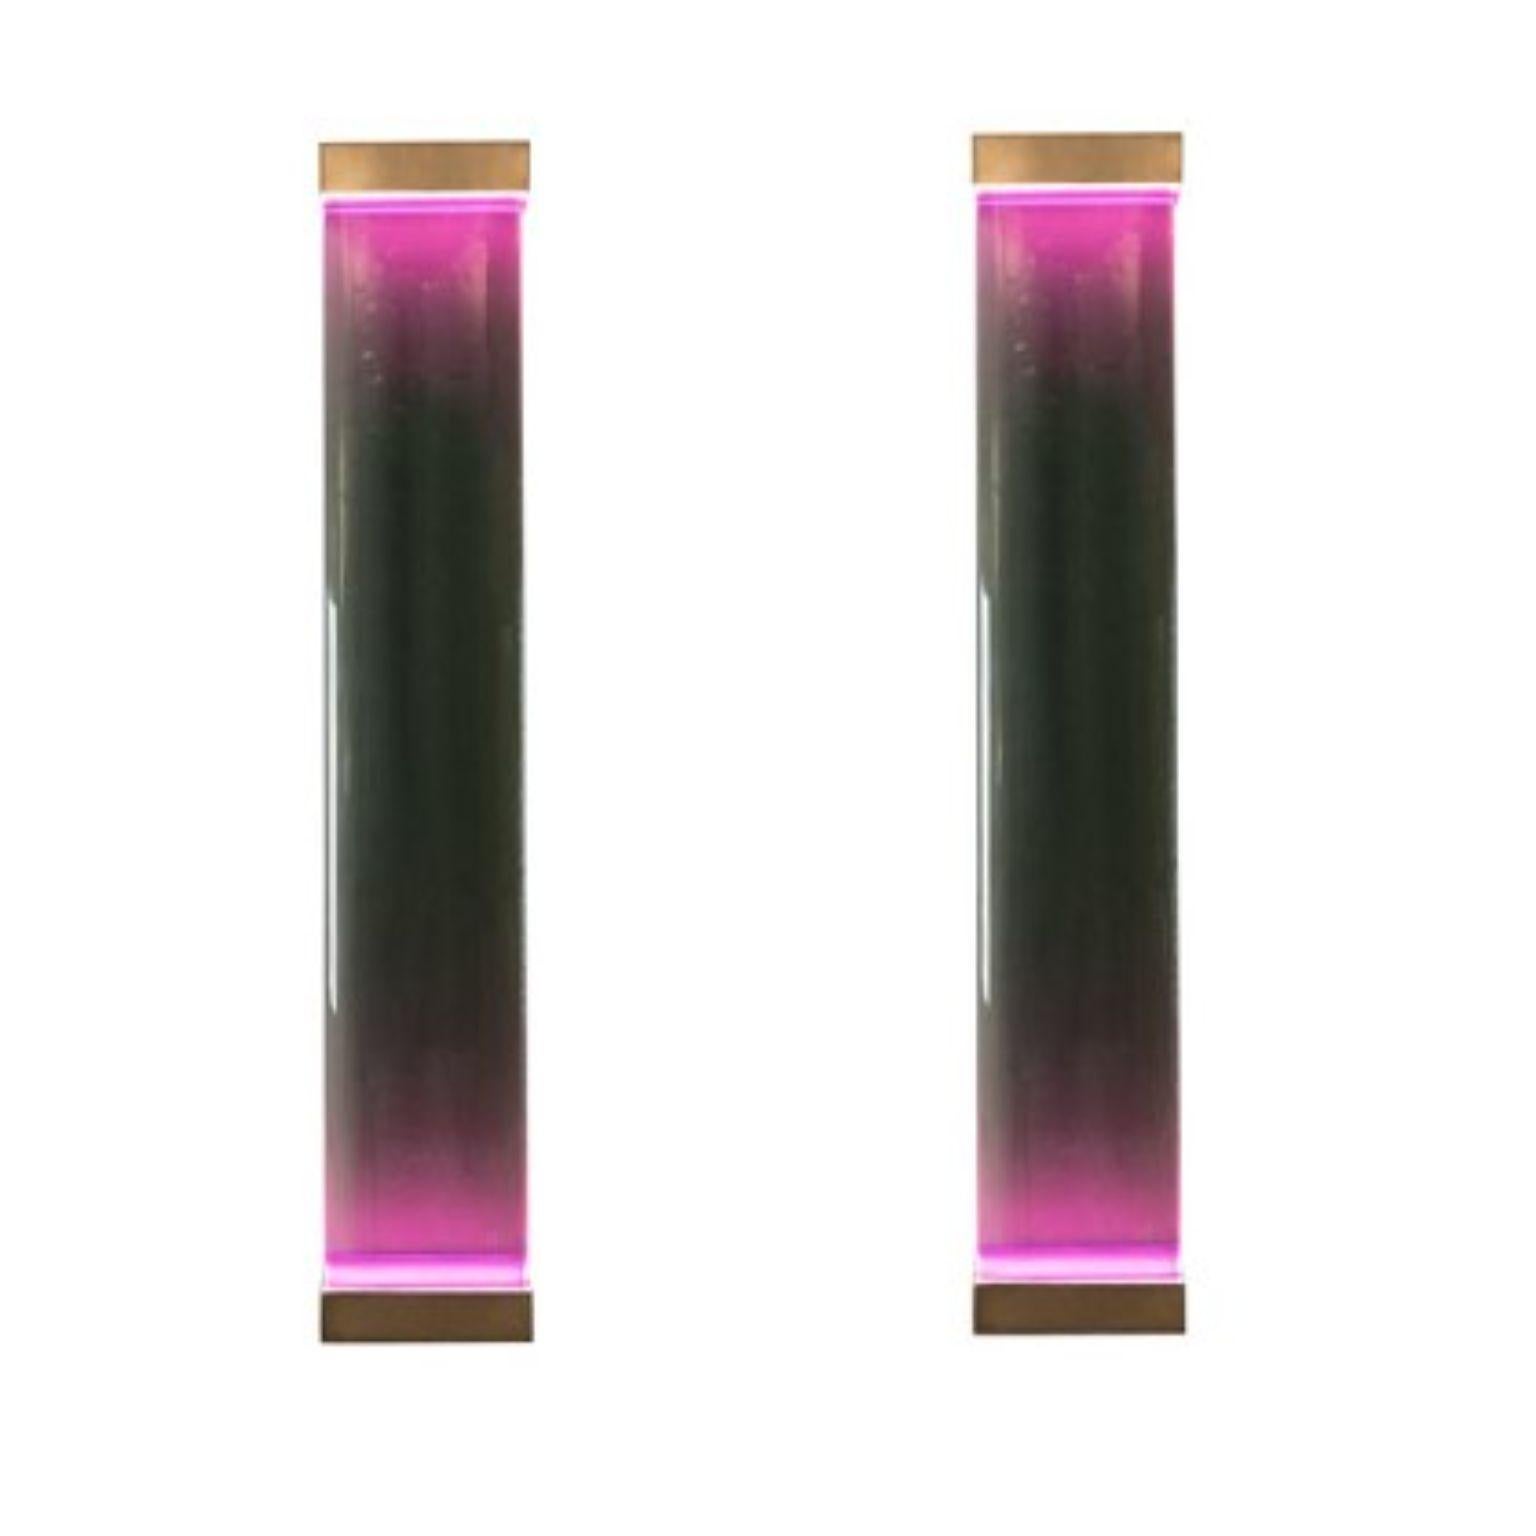 Set of 2 Jud Wall Lamps by Draga & Aurel
Dimensions: W 23, D 10, H 131.
Materials: Resin and brass

All our lamps can be wired according to each country. If sold to the USA it will be wired for the USA for instance.

Inspired by minimalism, the Jud